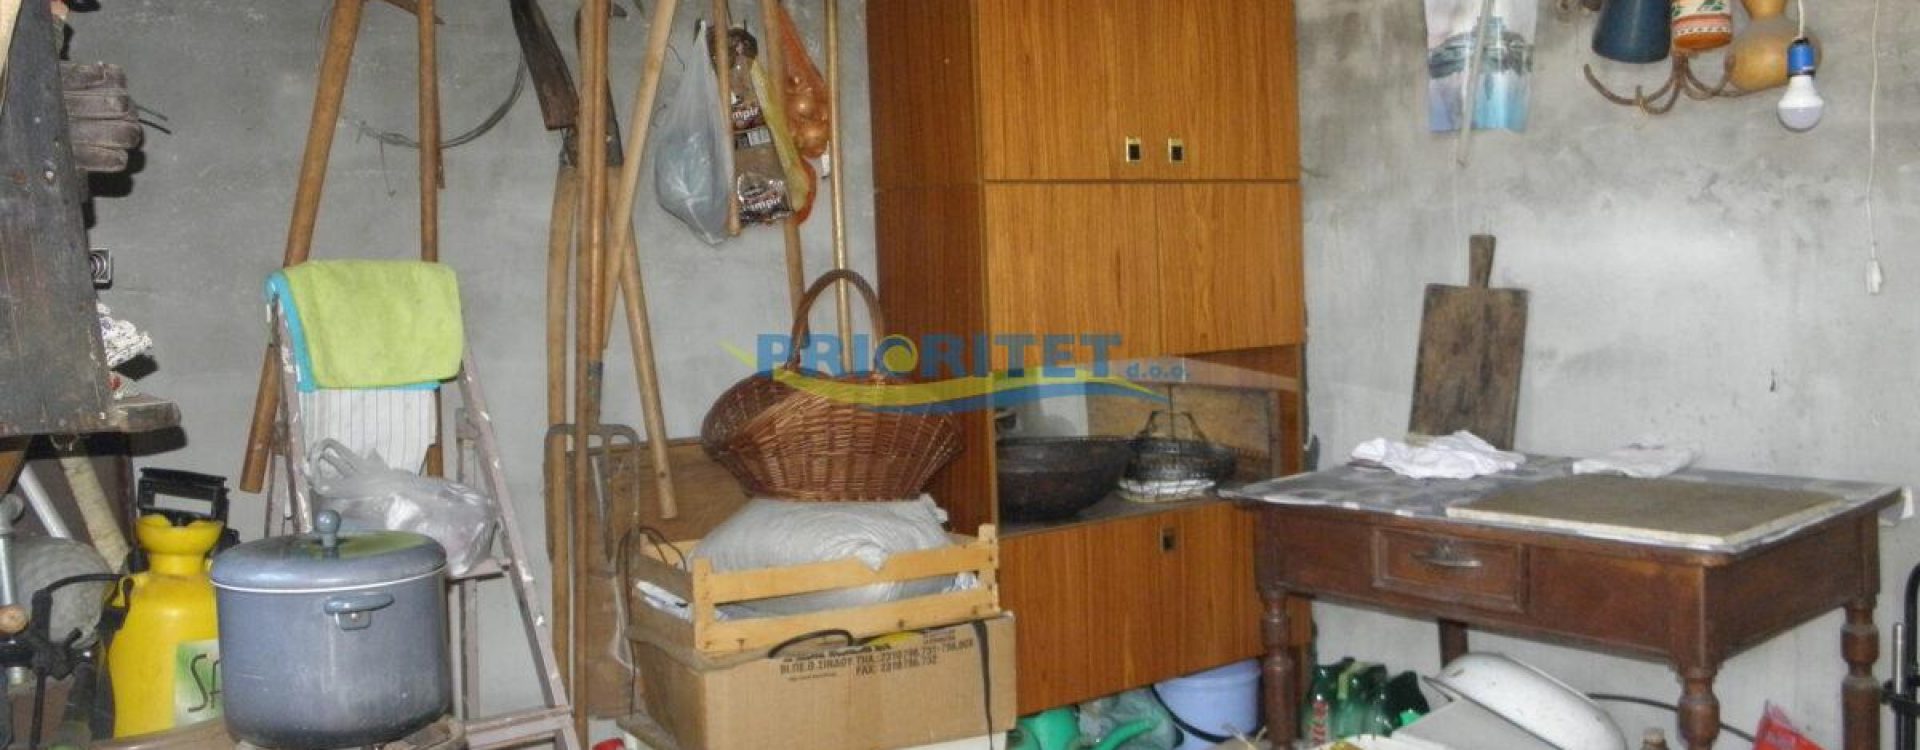 SMALL HOLYDAY COTTAGE IN PARADISE ENVIRONMENT (K 351)